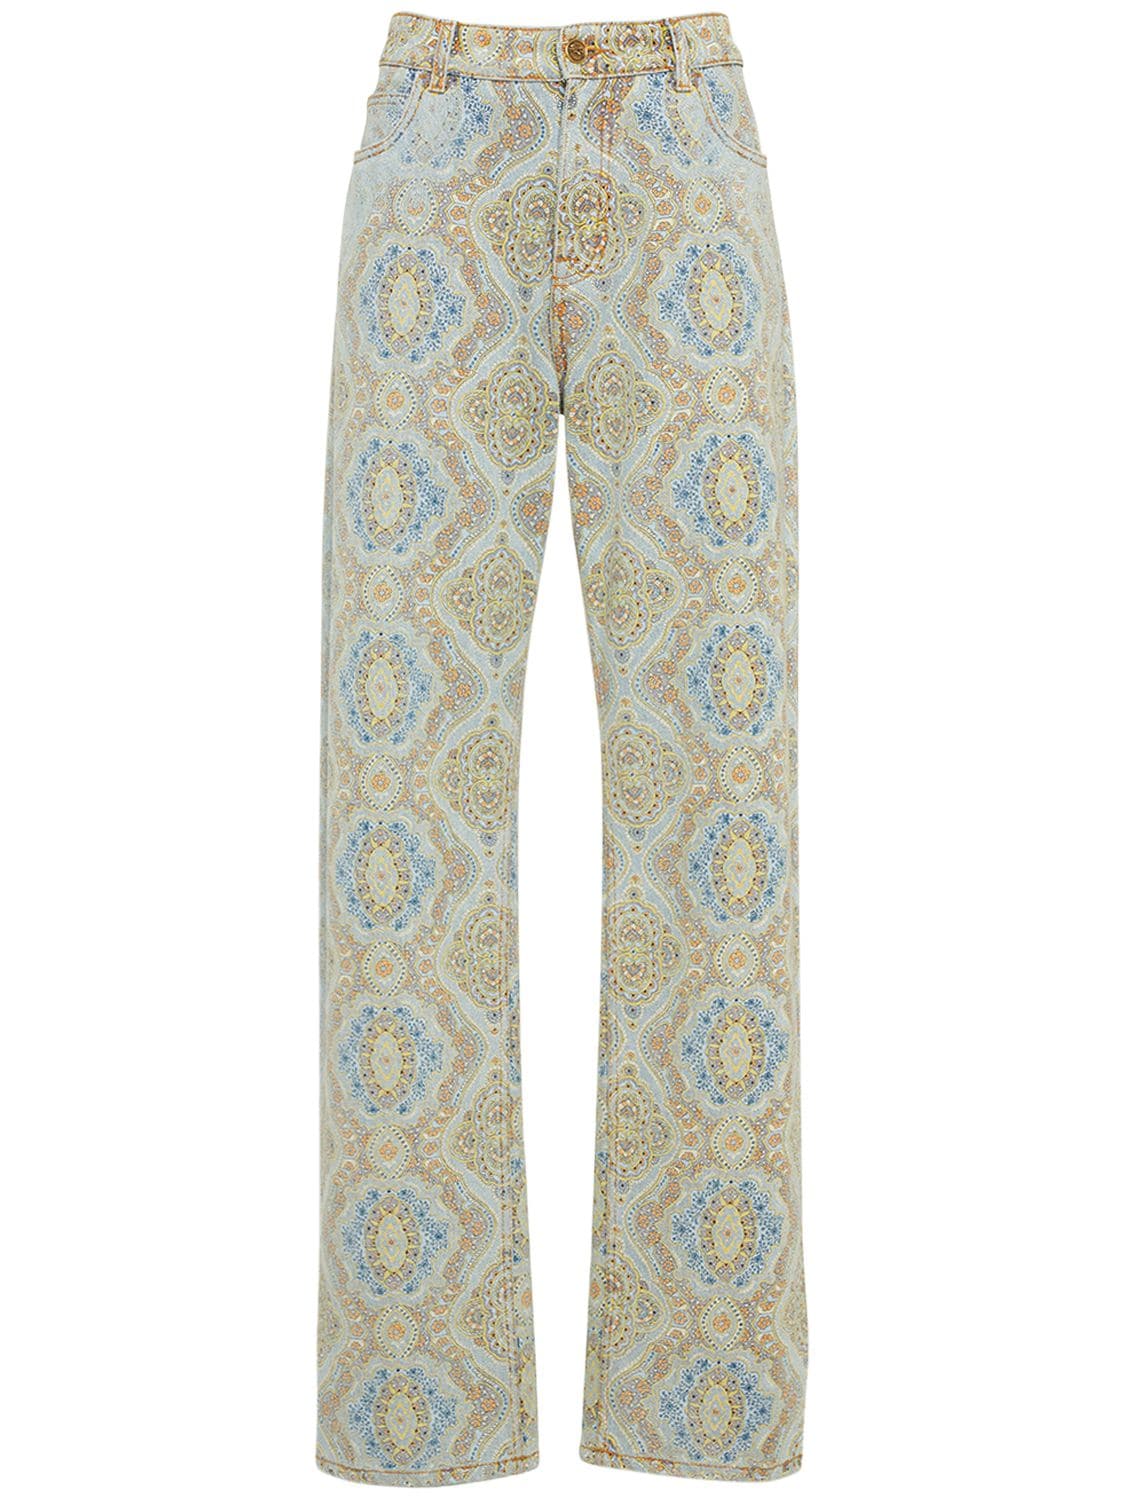 Image of Printed Cotton Denim High Rise Jeans